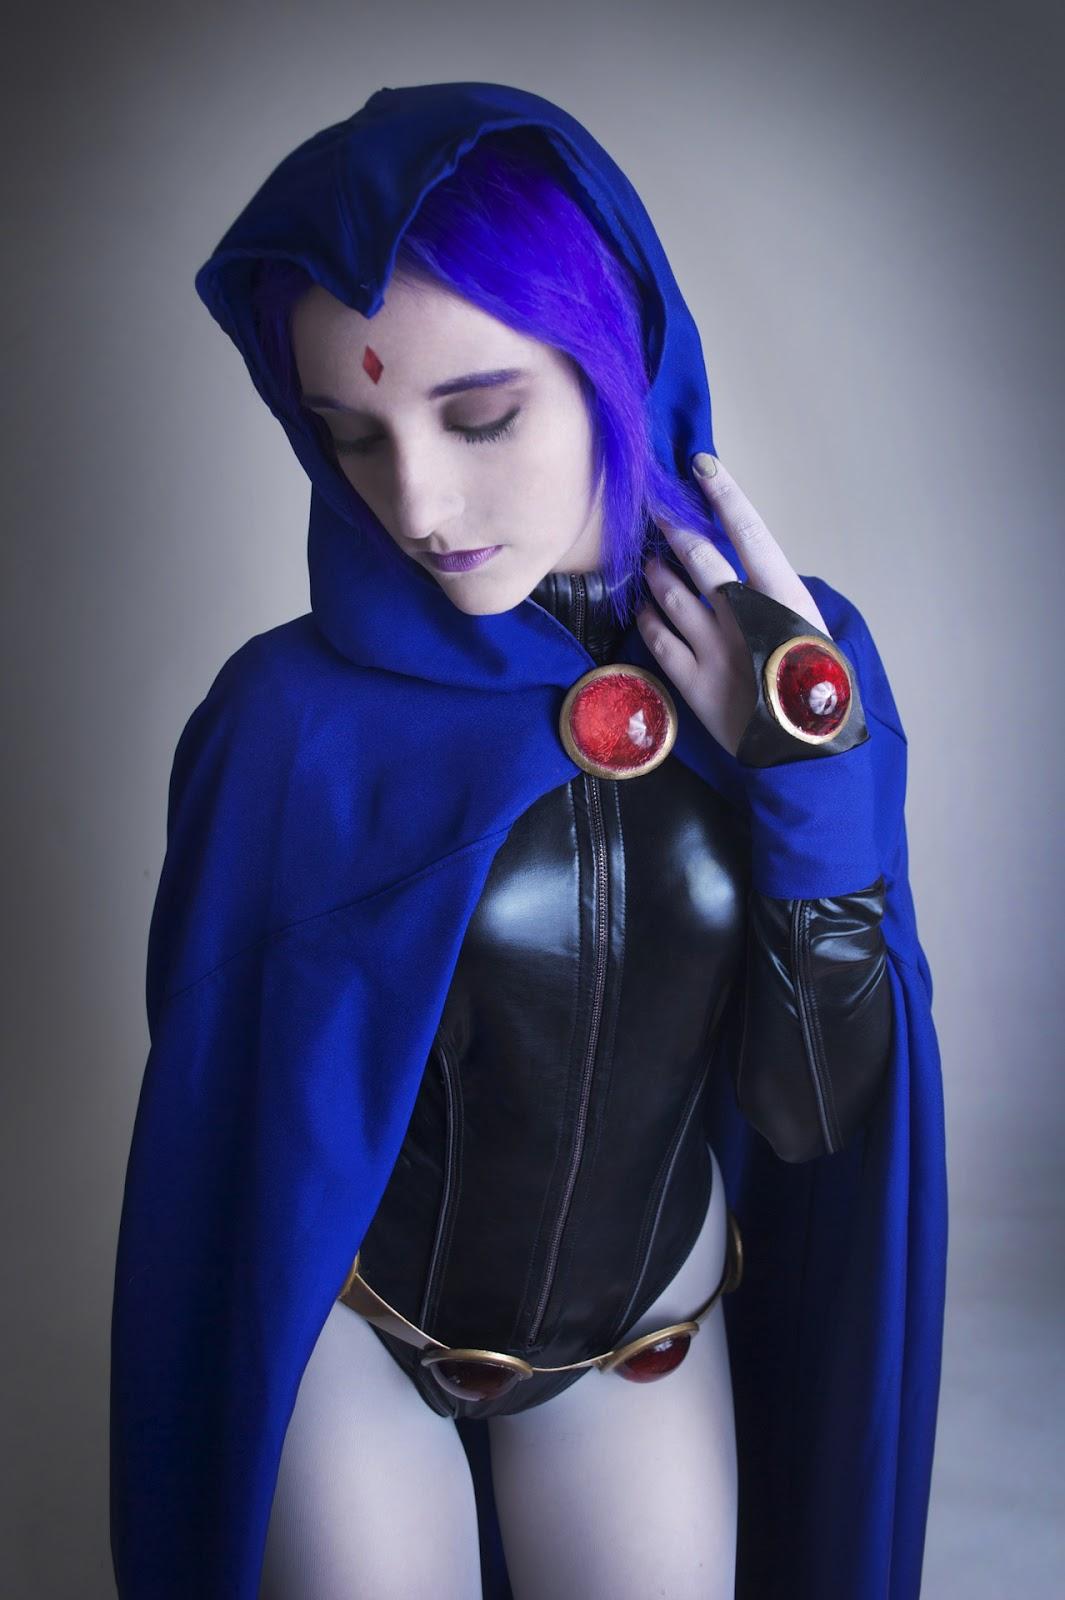 50+ Hot Pictures Of Raven From Teen Titans, DC Comics. 28